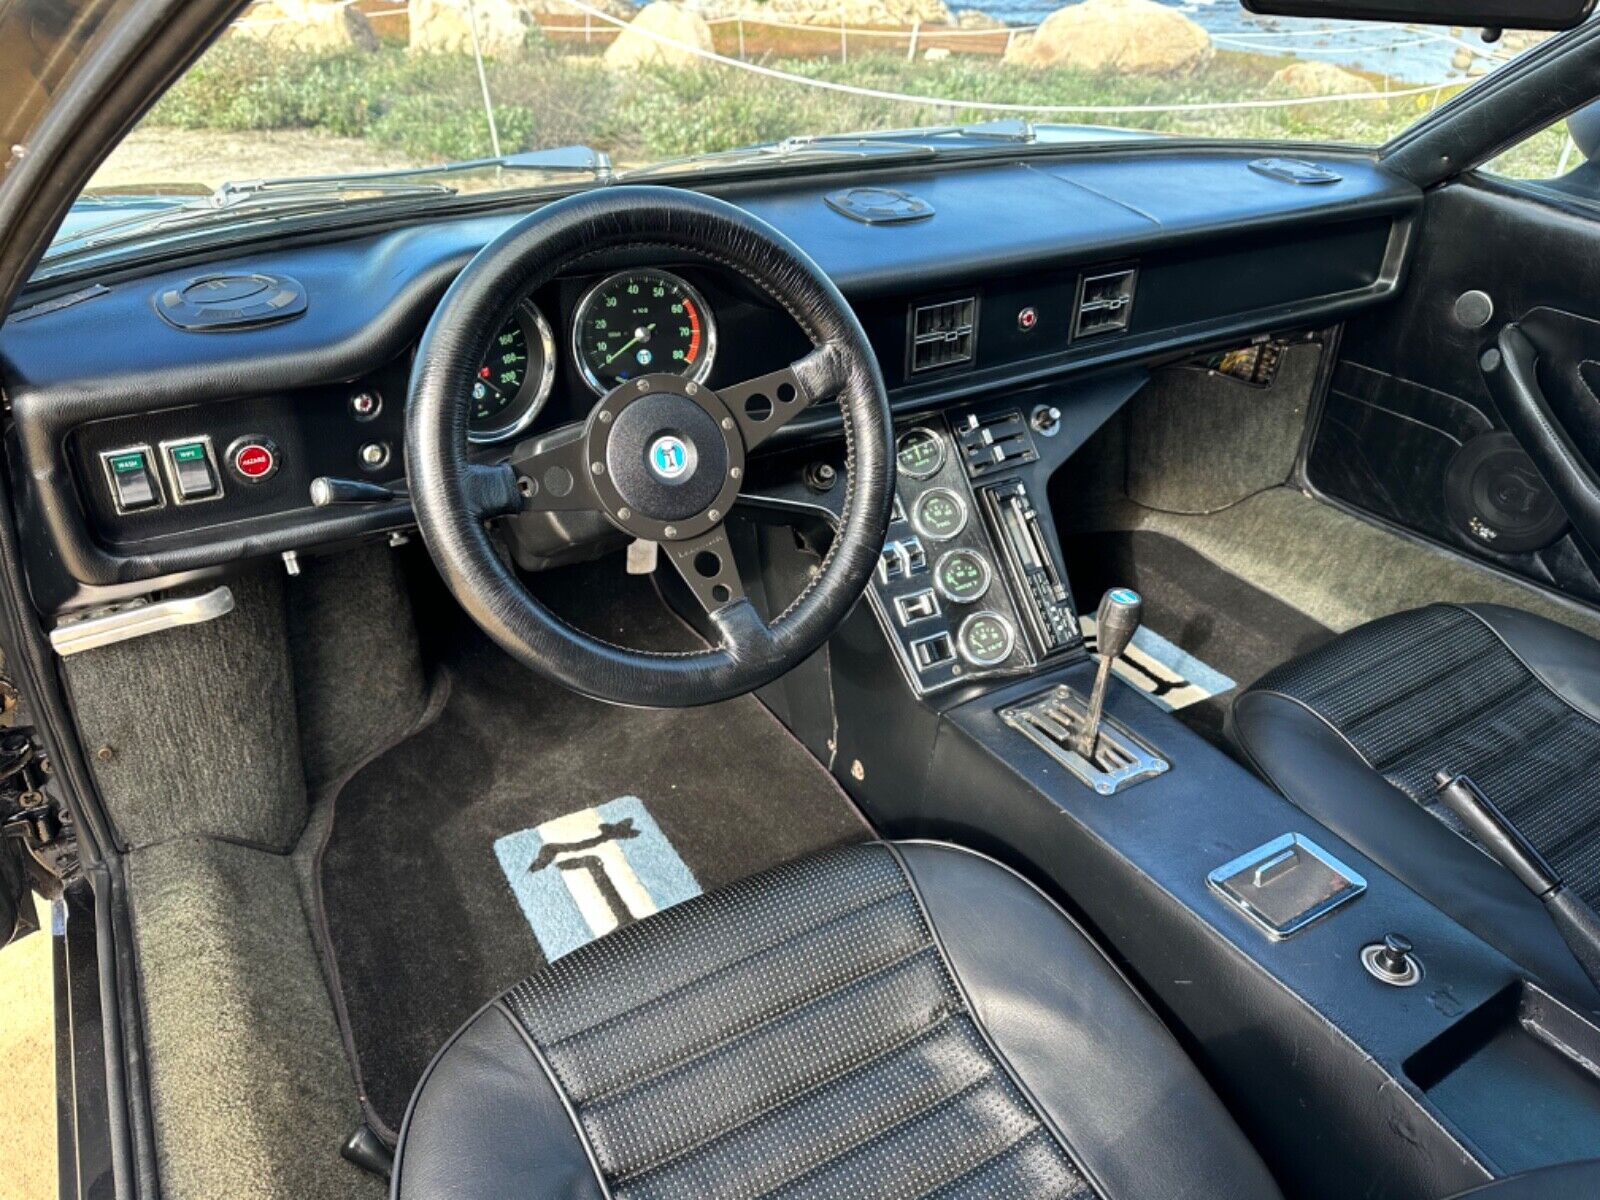 1974 De Tomaso Pantera interior from driver's side, with steering wheel, dashboard and center console